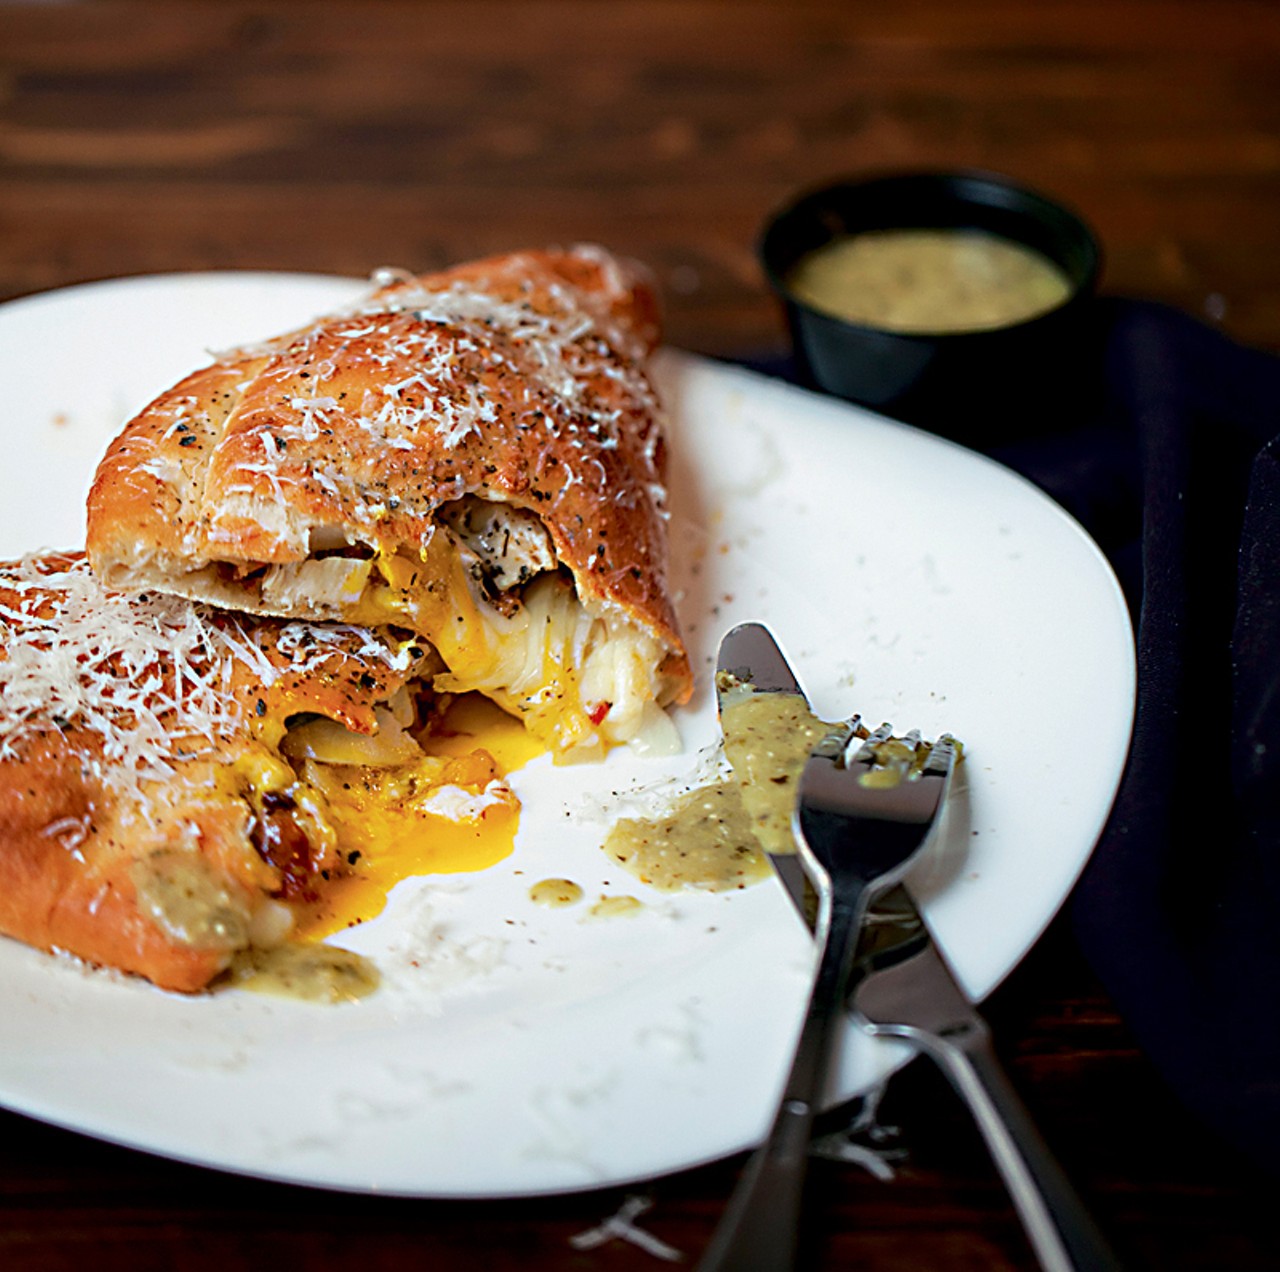 The "Which Came First...?" calzone is filled with roasted pulled chicken, applewood-smoked bacon, jalapenos, egg, onion and mozzarella. It is served with a salsa verde.